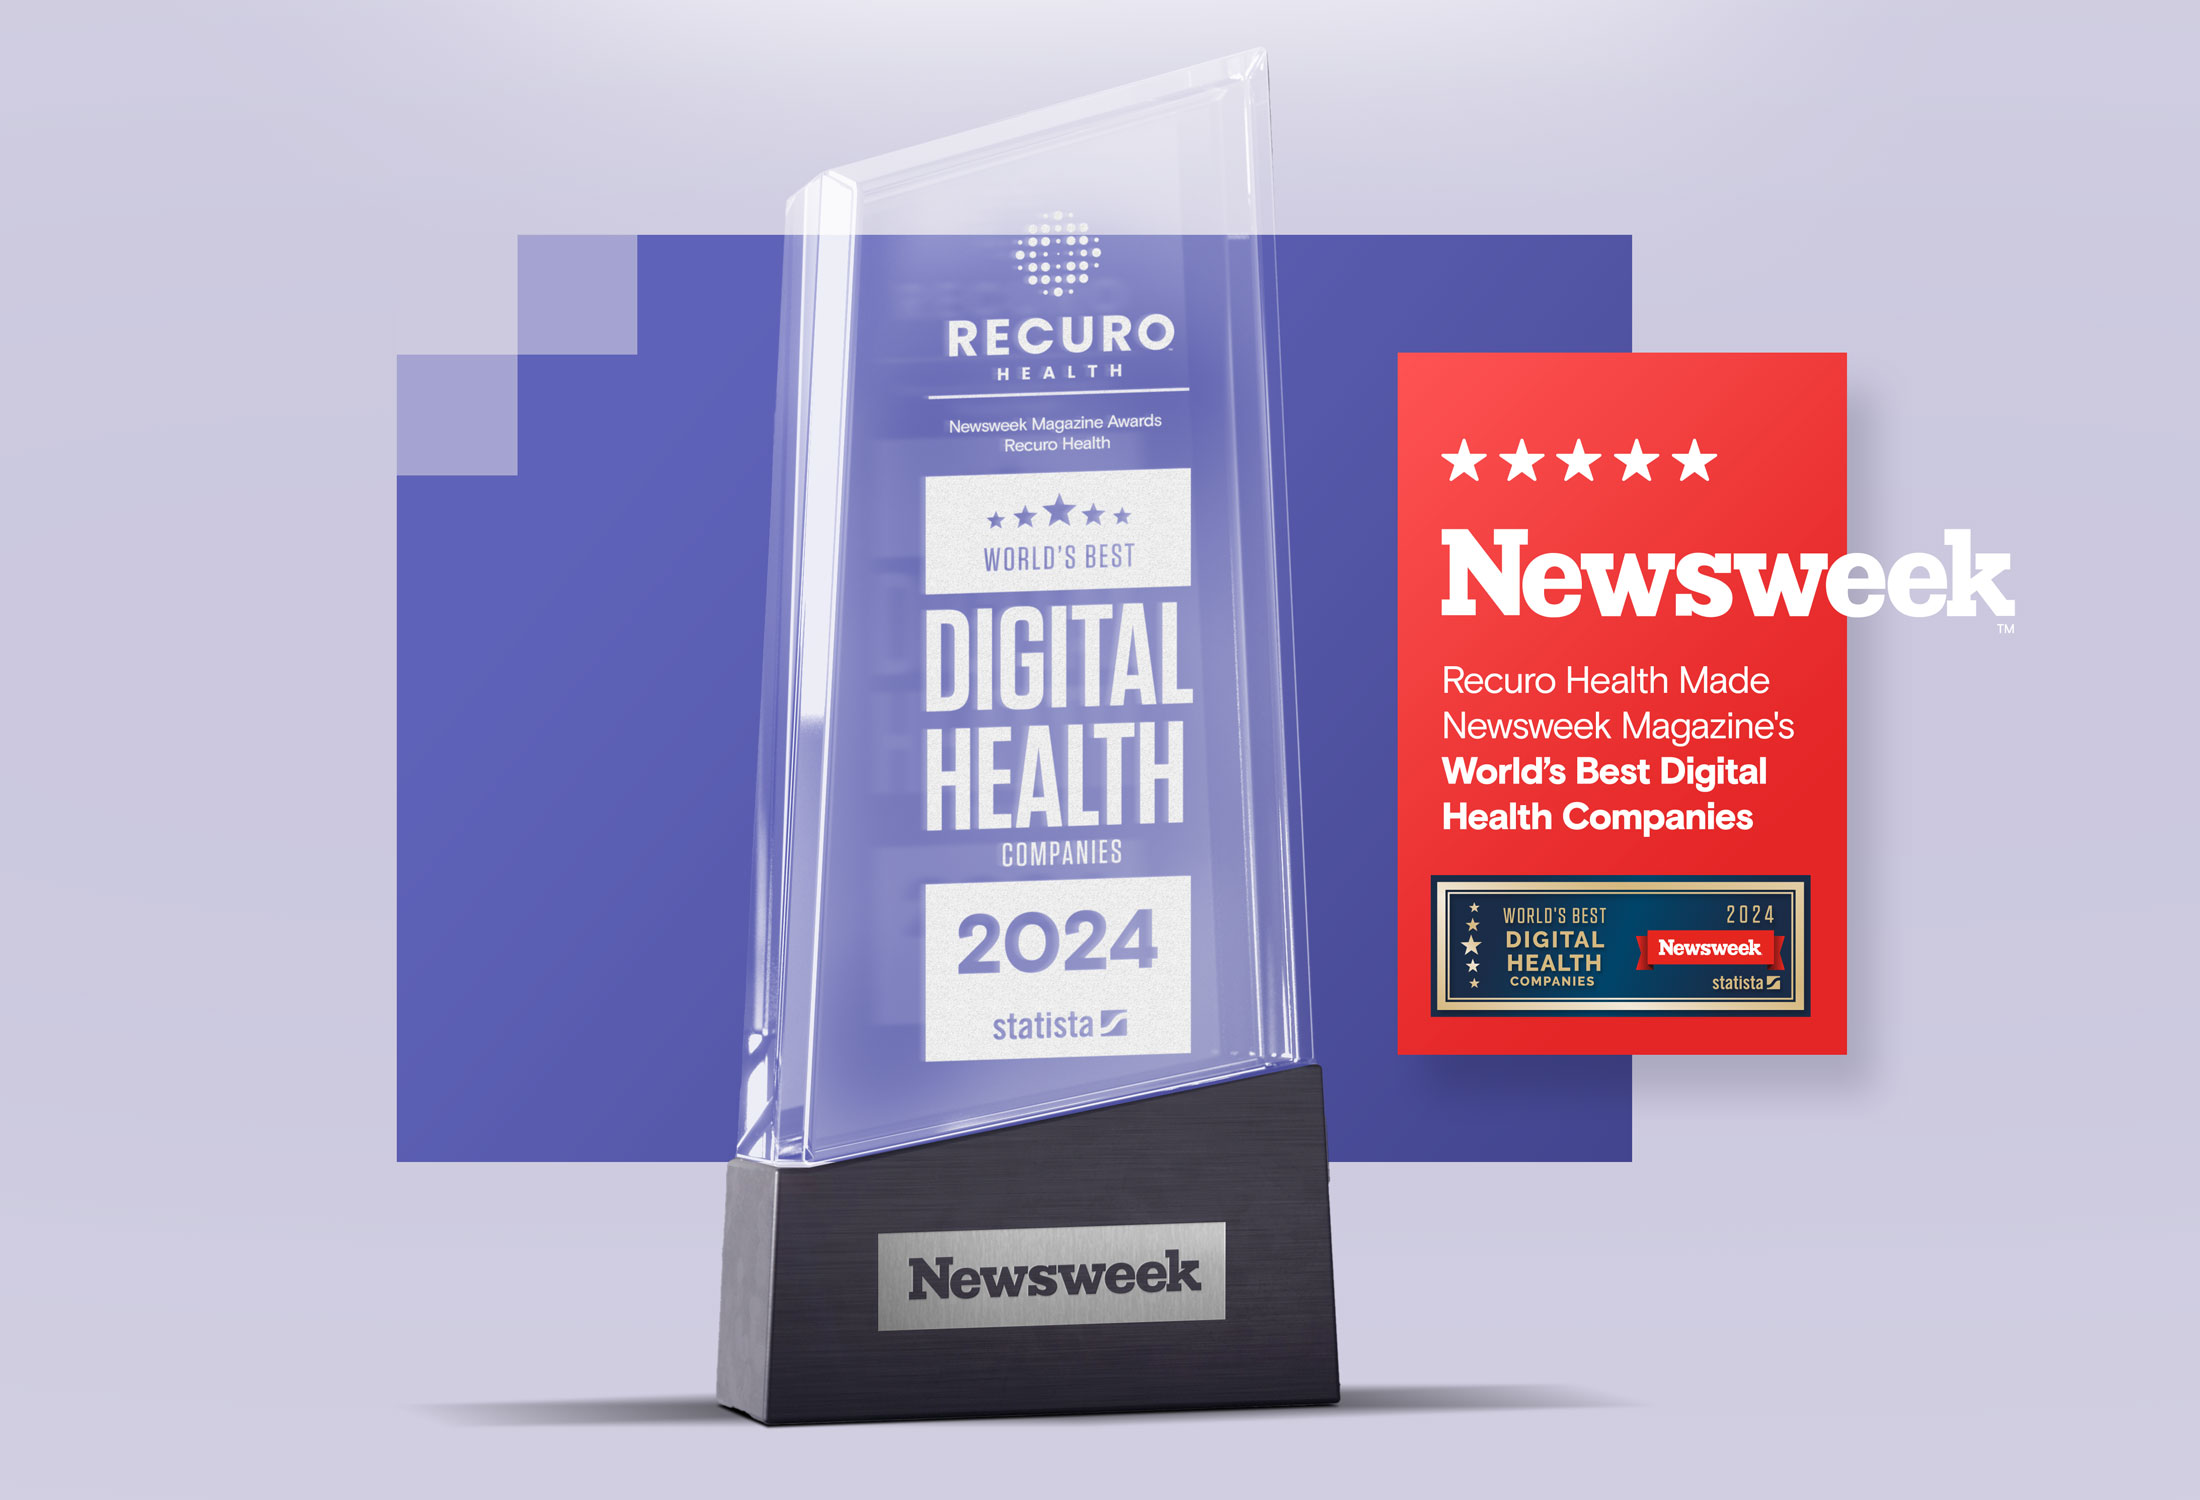 Newsweek Recognizes Recuro as One of the World’s Best Digital Health Companies